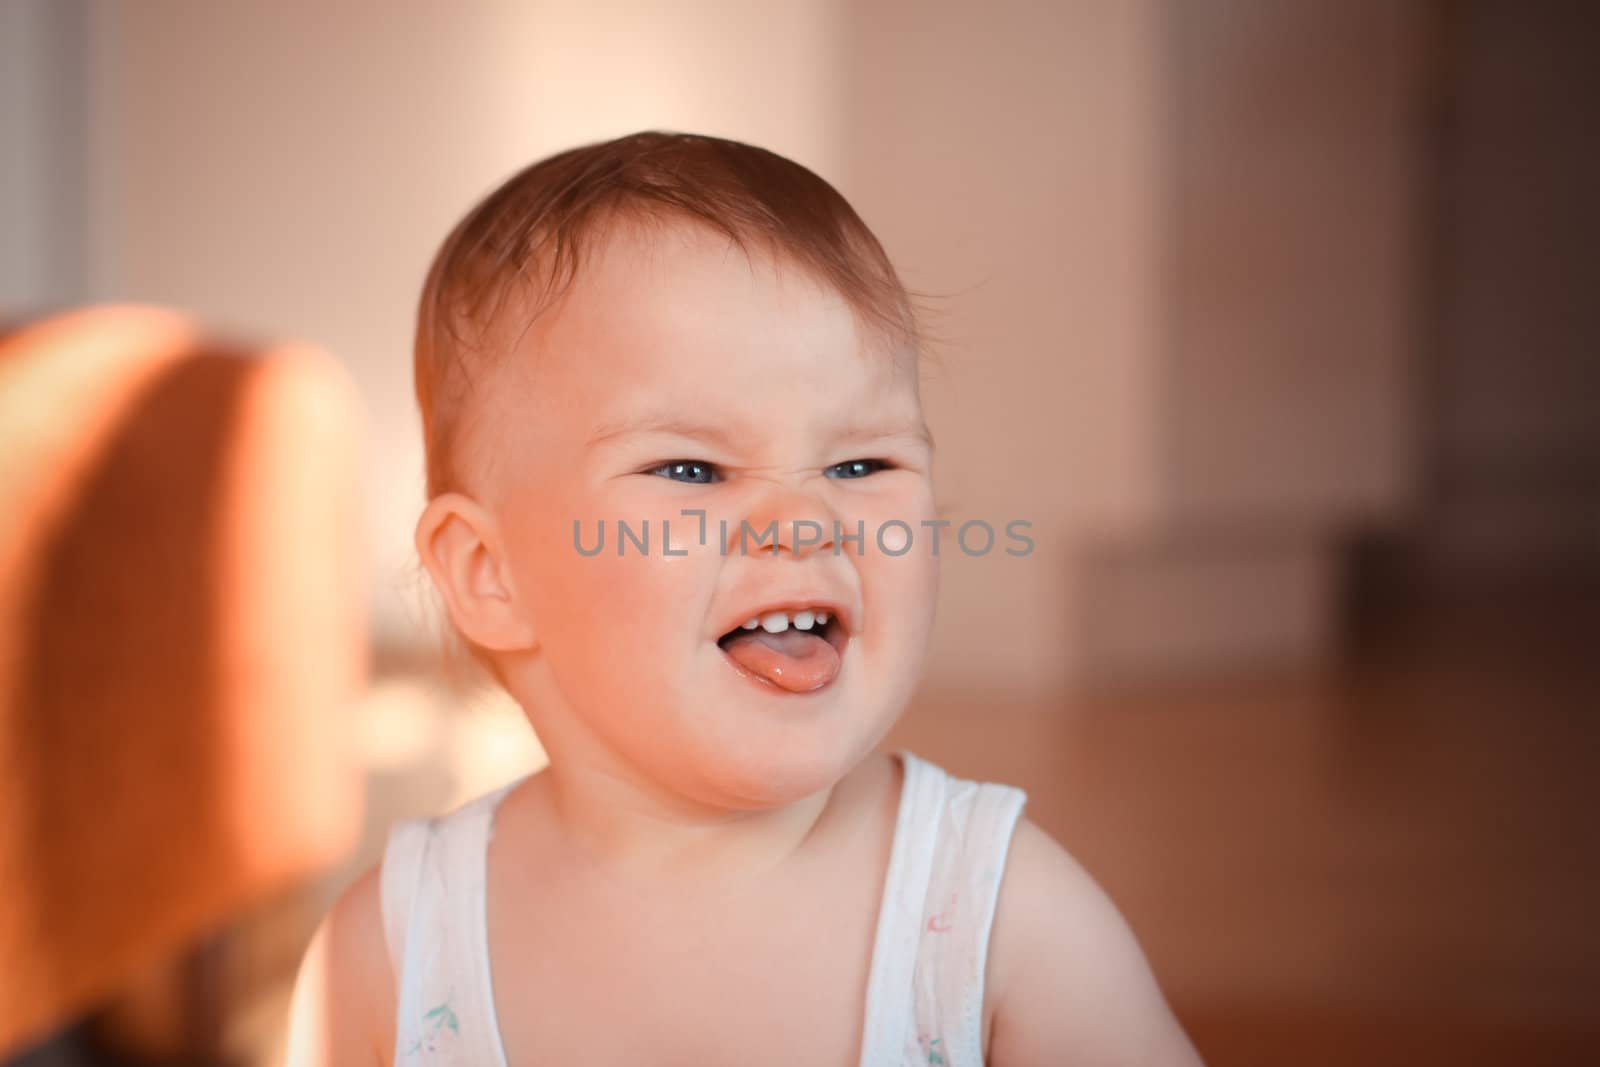 Beautiful expressive adorable happy cute laughing smiling baby infant face showing tongue